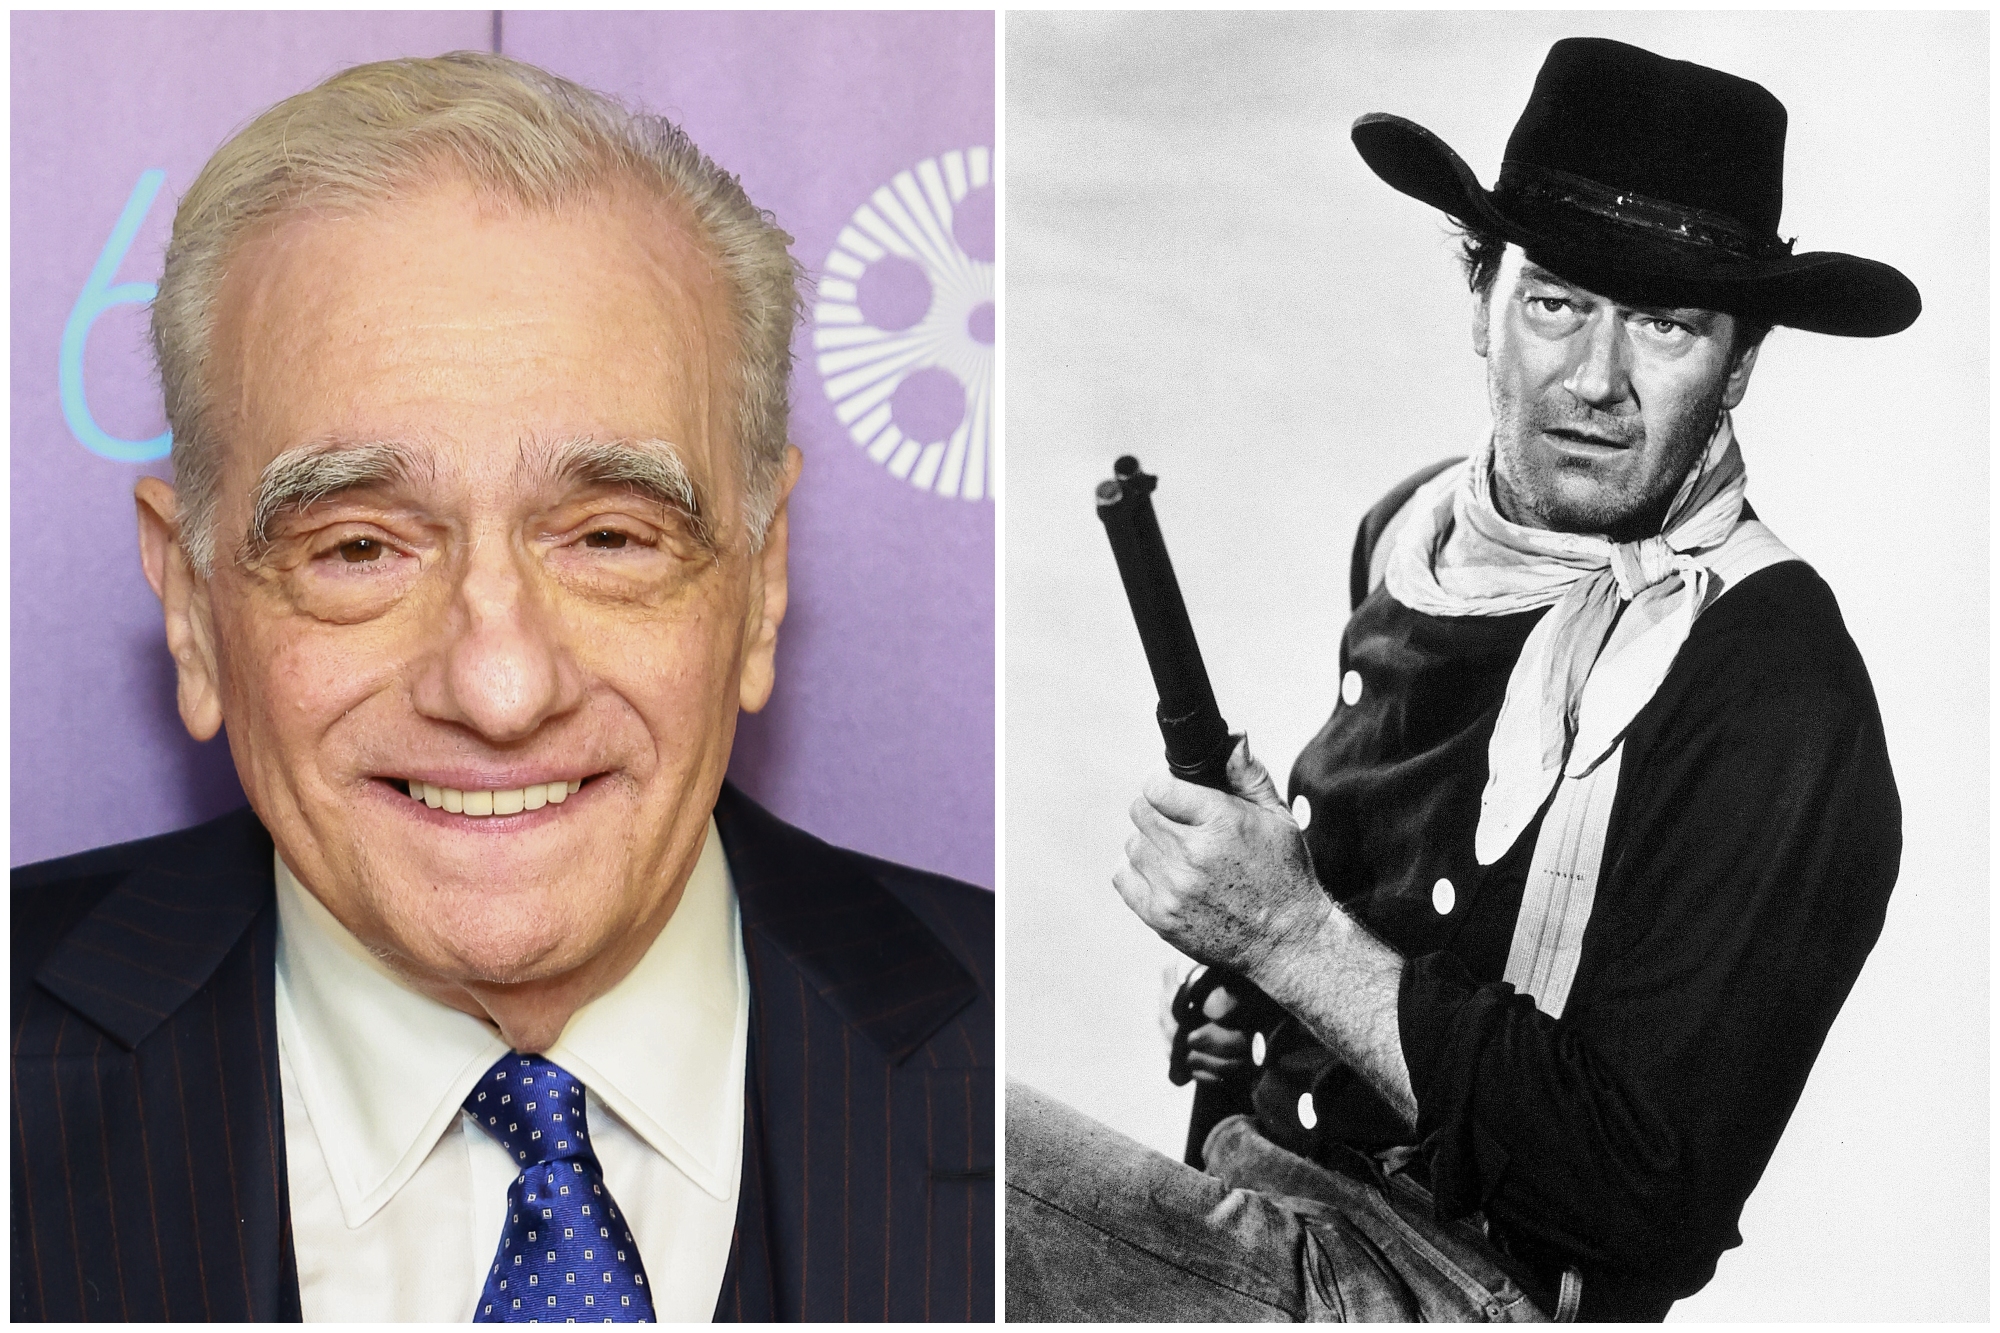 Martin Scorsese and John Wayne. Scorsese is smiling in front of a purple step-and-repeat. Wayne is wearing a Western costume from 'The Searchers' in a black-and-white photo holding a gun.